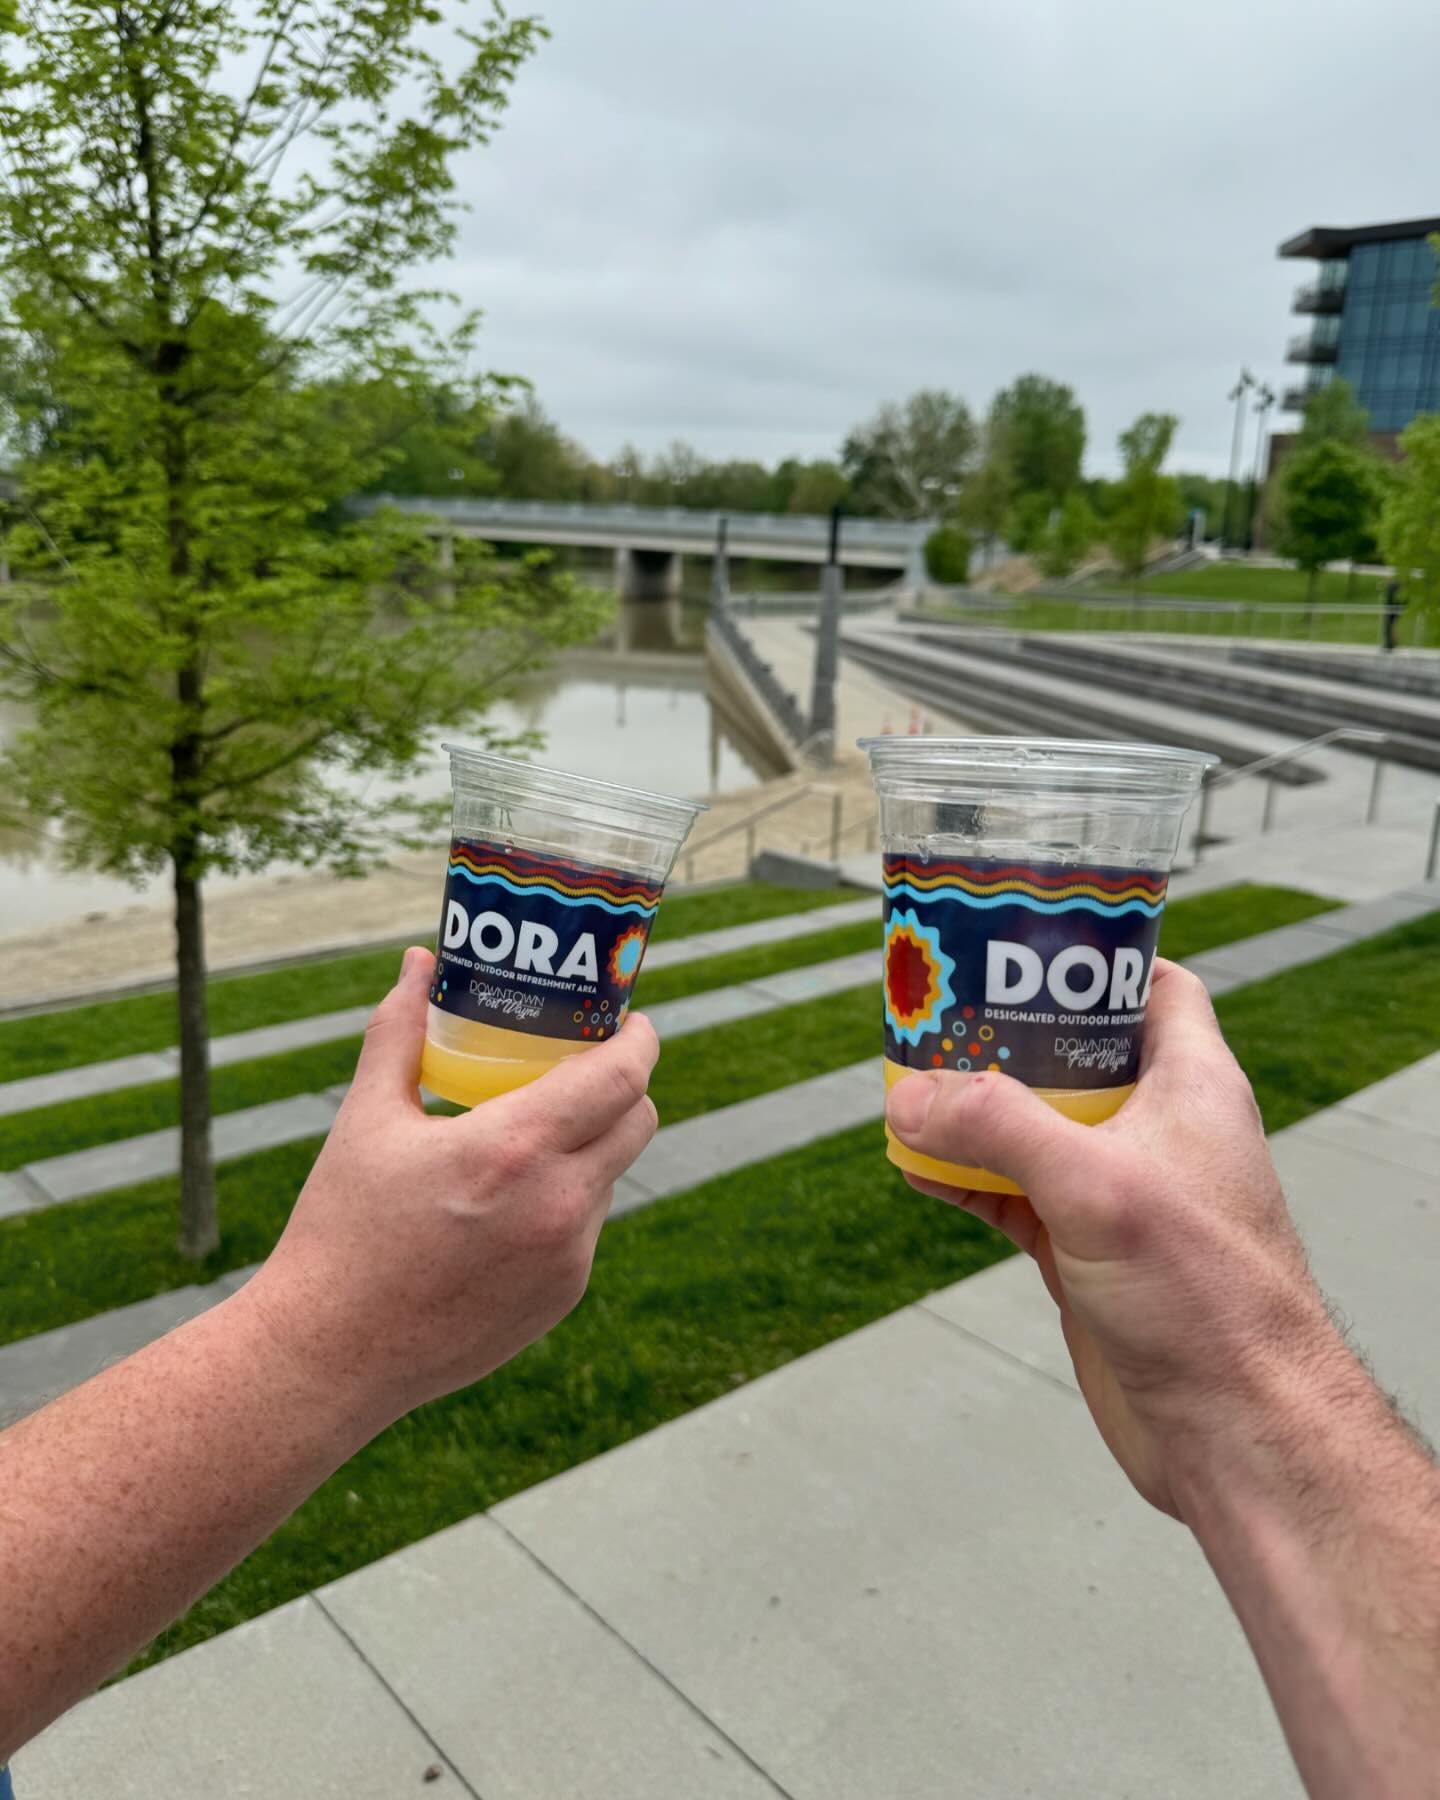 It is officially DORA day! We are cutting off the signs and walking through the park with today our DORA cups!

Open today at 11 AM to 4 PM. Come down to Promenade Park and kick off Dora. We are the first stop on Dora 

#Teds #SnackBar #DTFW #FortWay